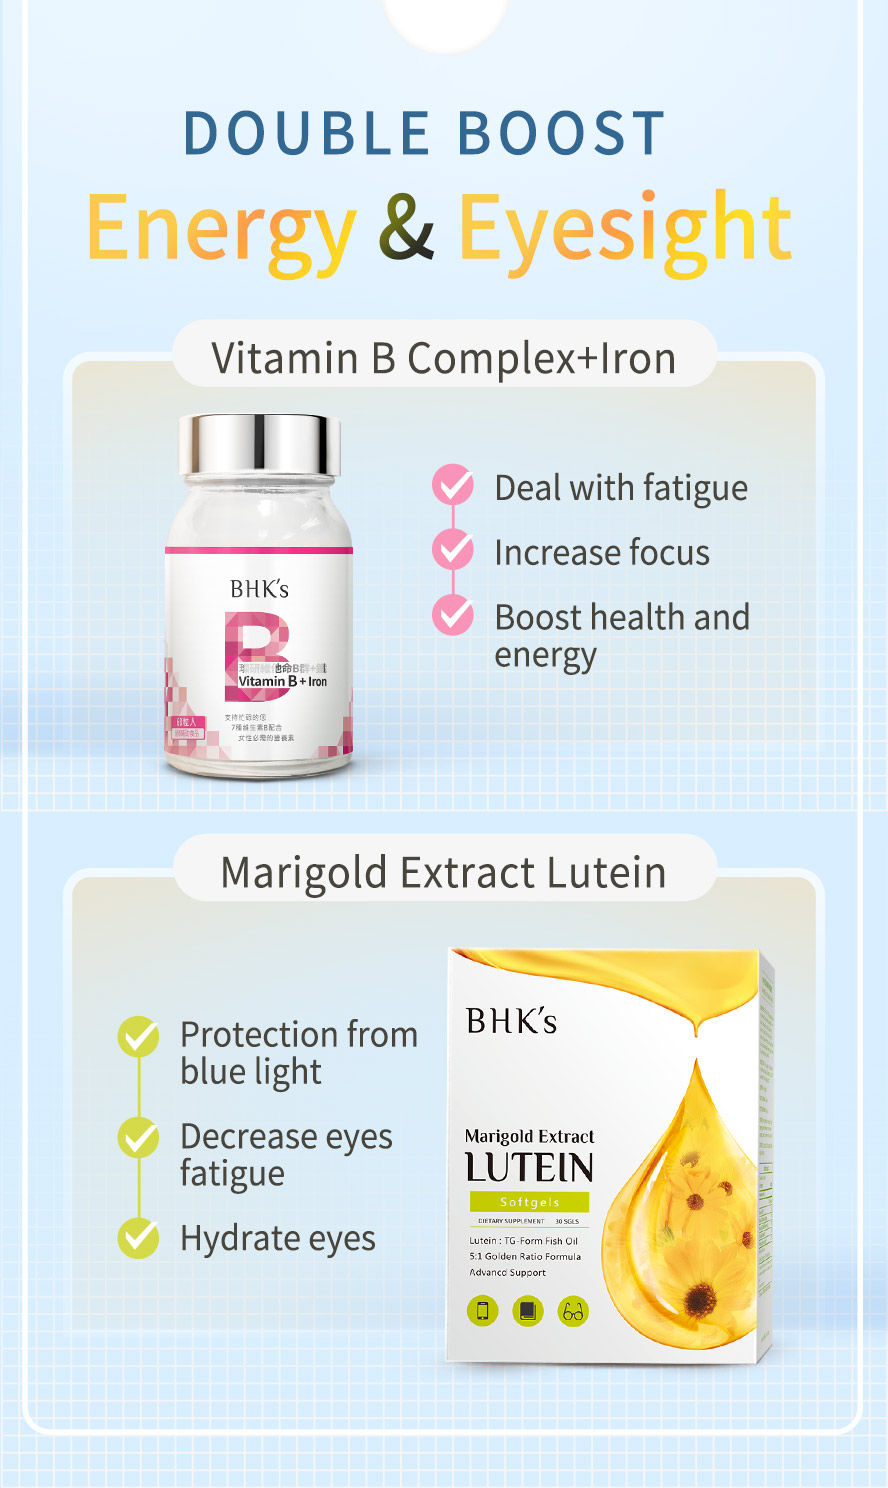 B complex to enhance energy and boost energy, lutein to protect eye from blue light damage, soothe discomfort